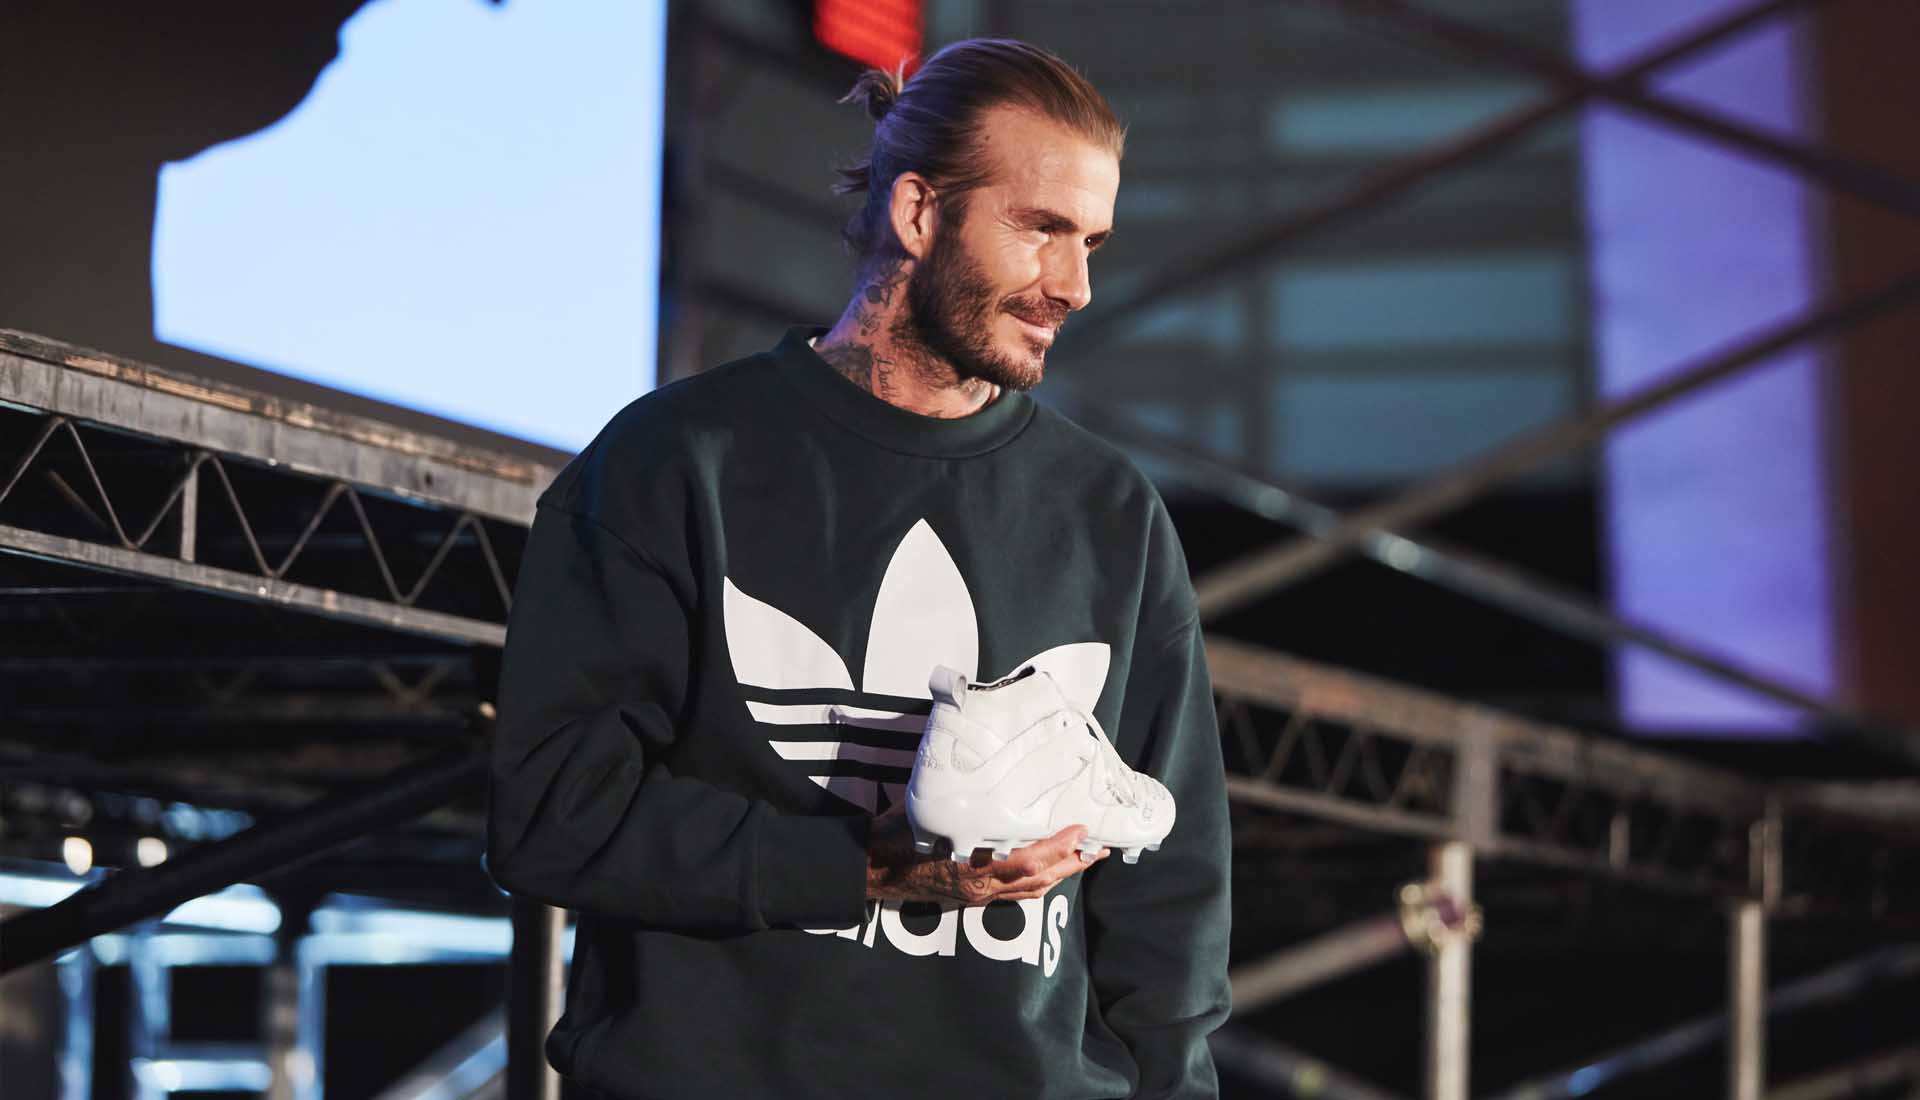 SoccerBible on Twitter: Beckham Capsule Collection in London last night. More here: https://t.co/PsZNMFVasE https://t.co/fCyjgQvsv6" / Twitter